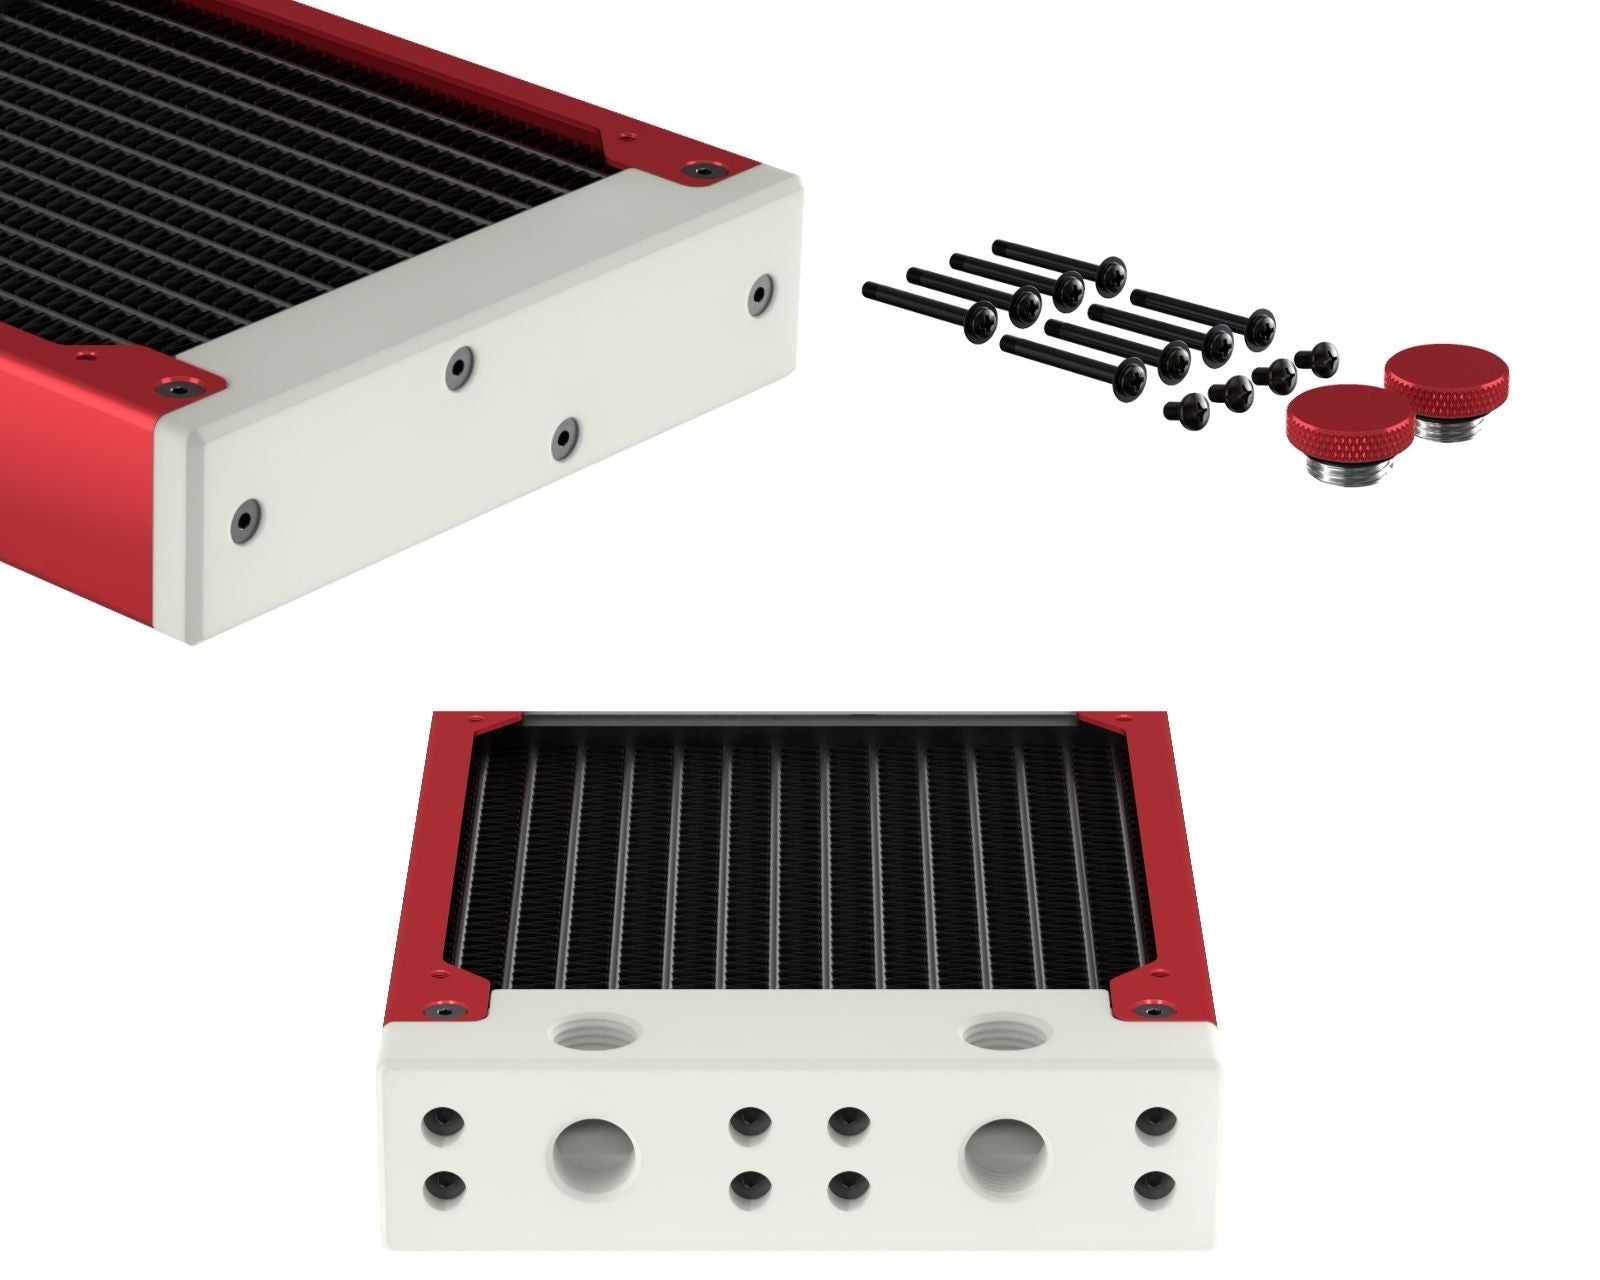 PrimoChill 240SL (30mm) EXIMO Modular Radiator, White POM, 2x120mm, Dual Fan (R-SL-W24) Available in 20+ Colors, Assembled in USA and Custom Watercooling Loop Ready - Candy Red